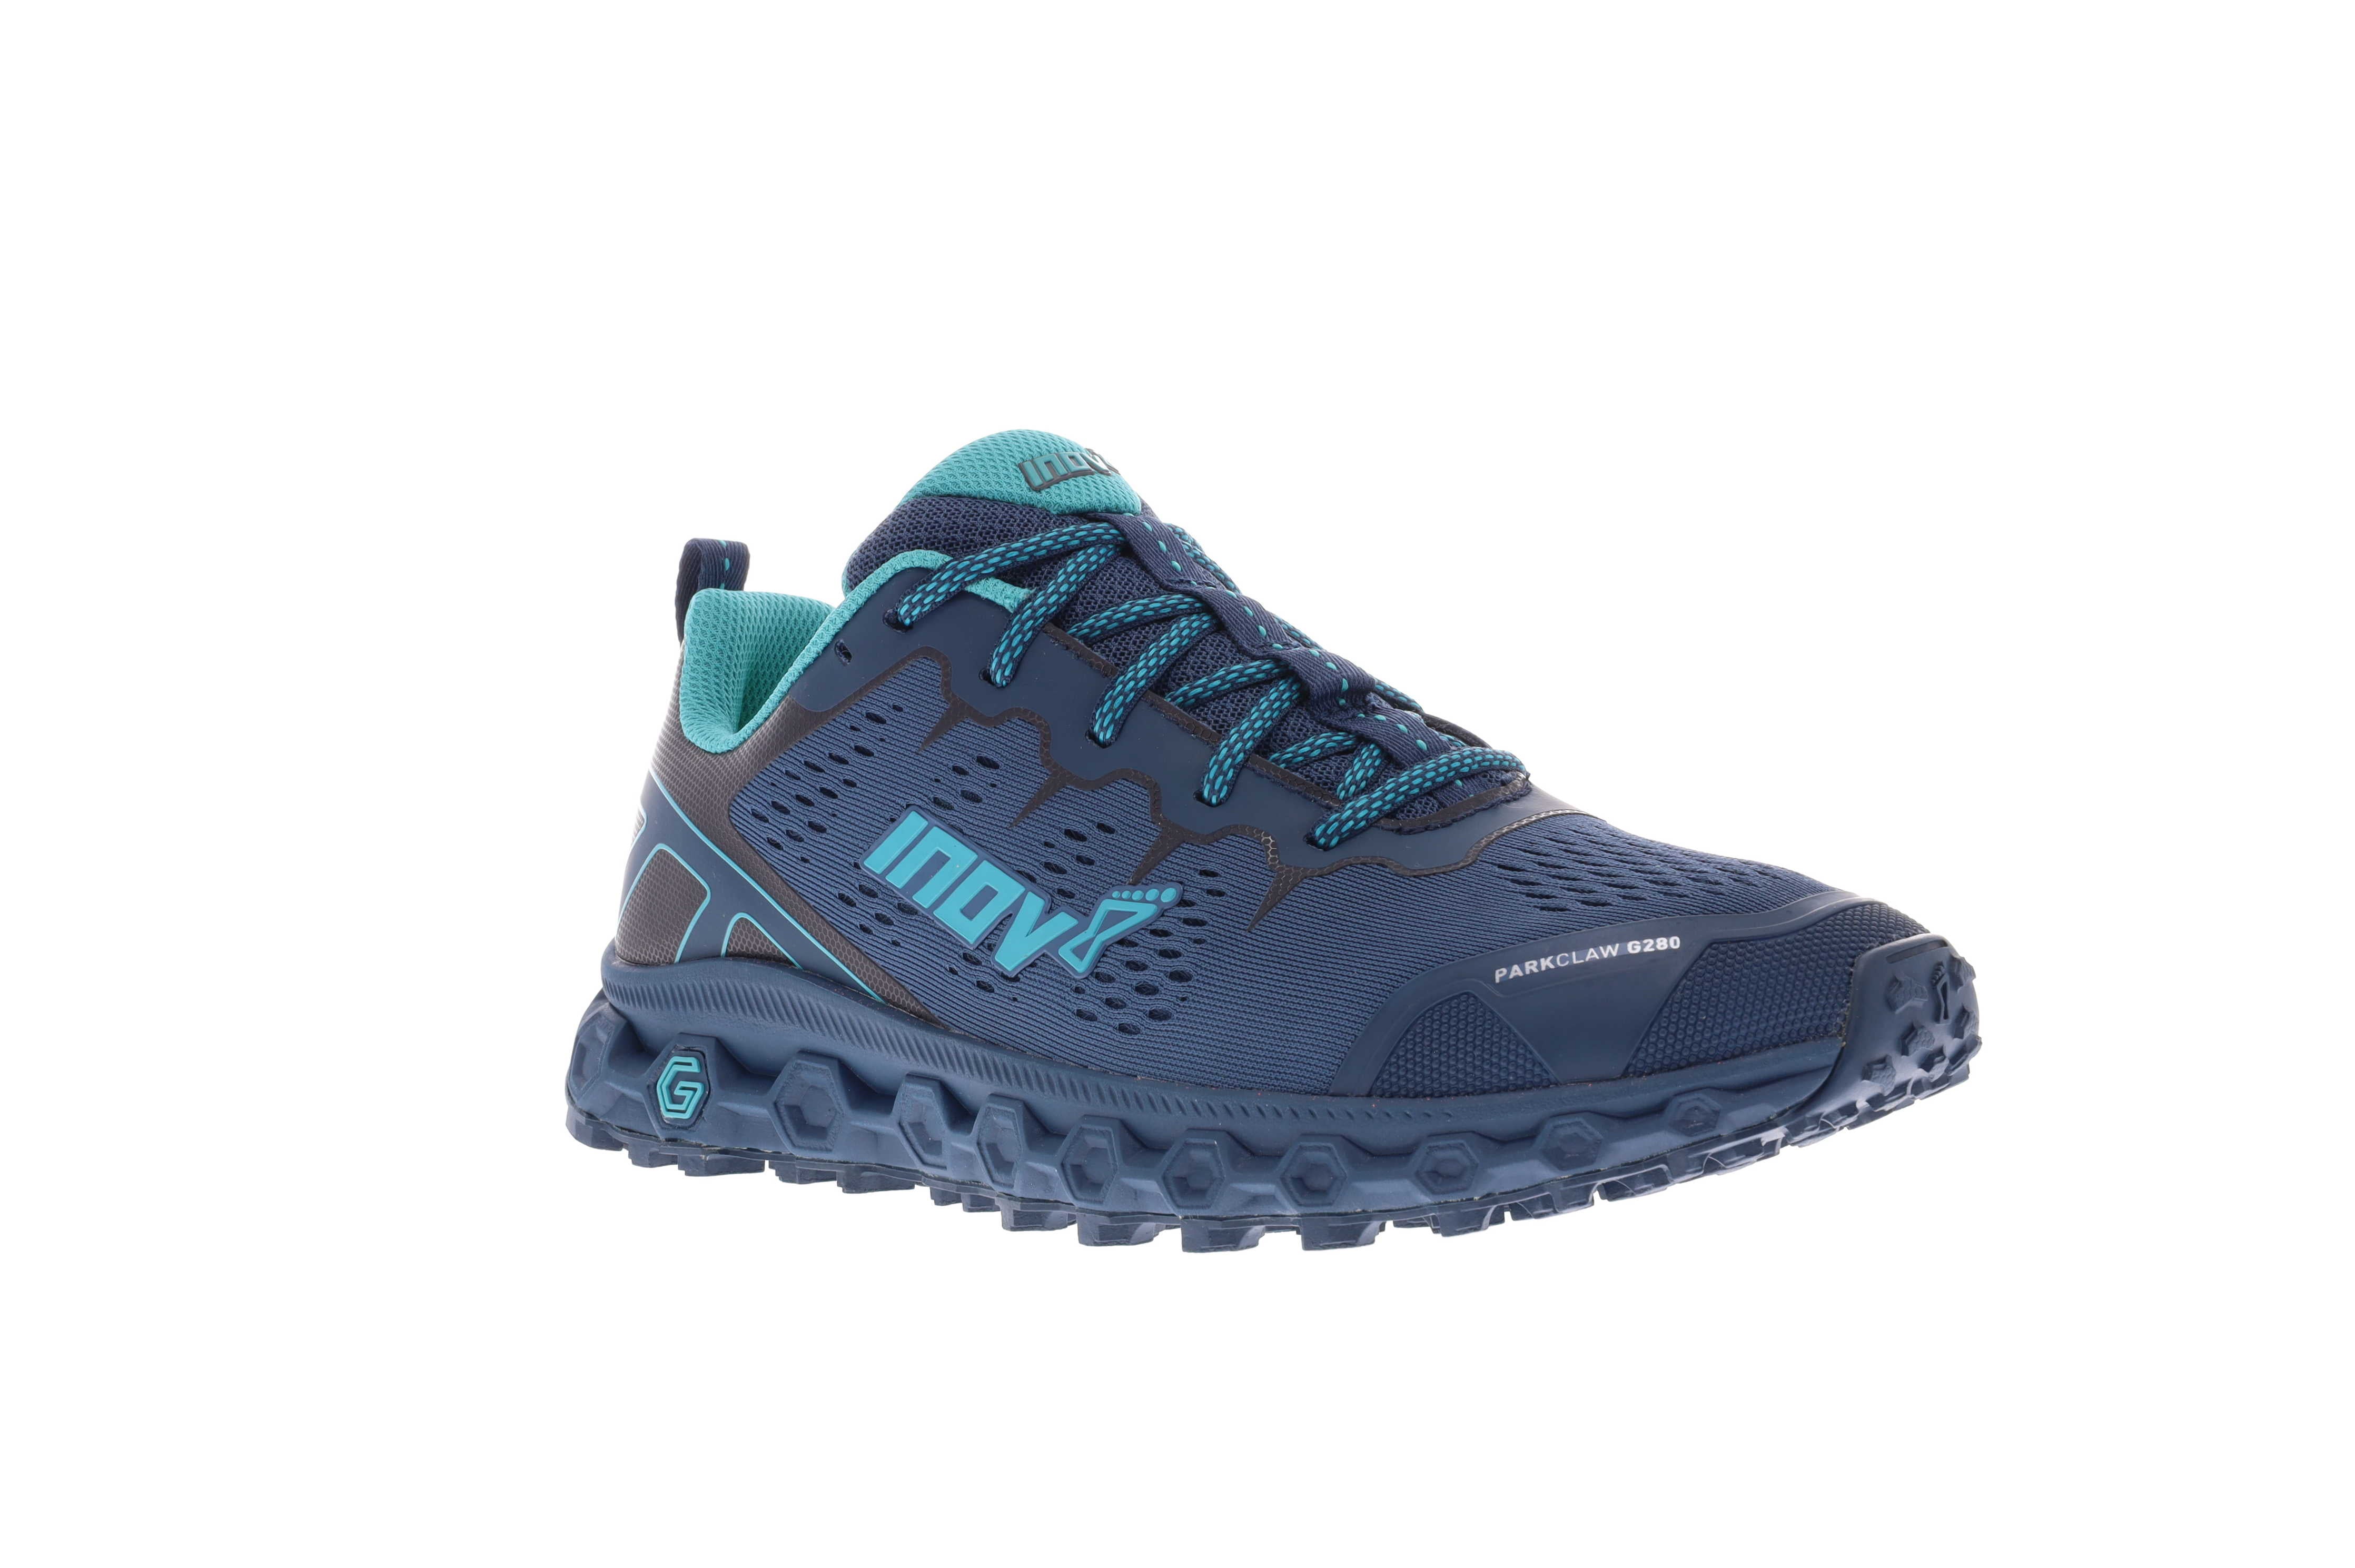 Men's Parkclaw G 280 Road to Trail Running Shoe